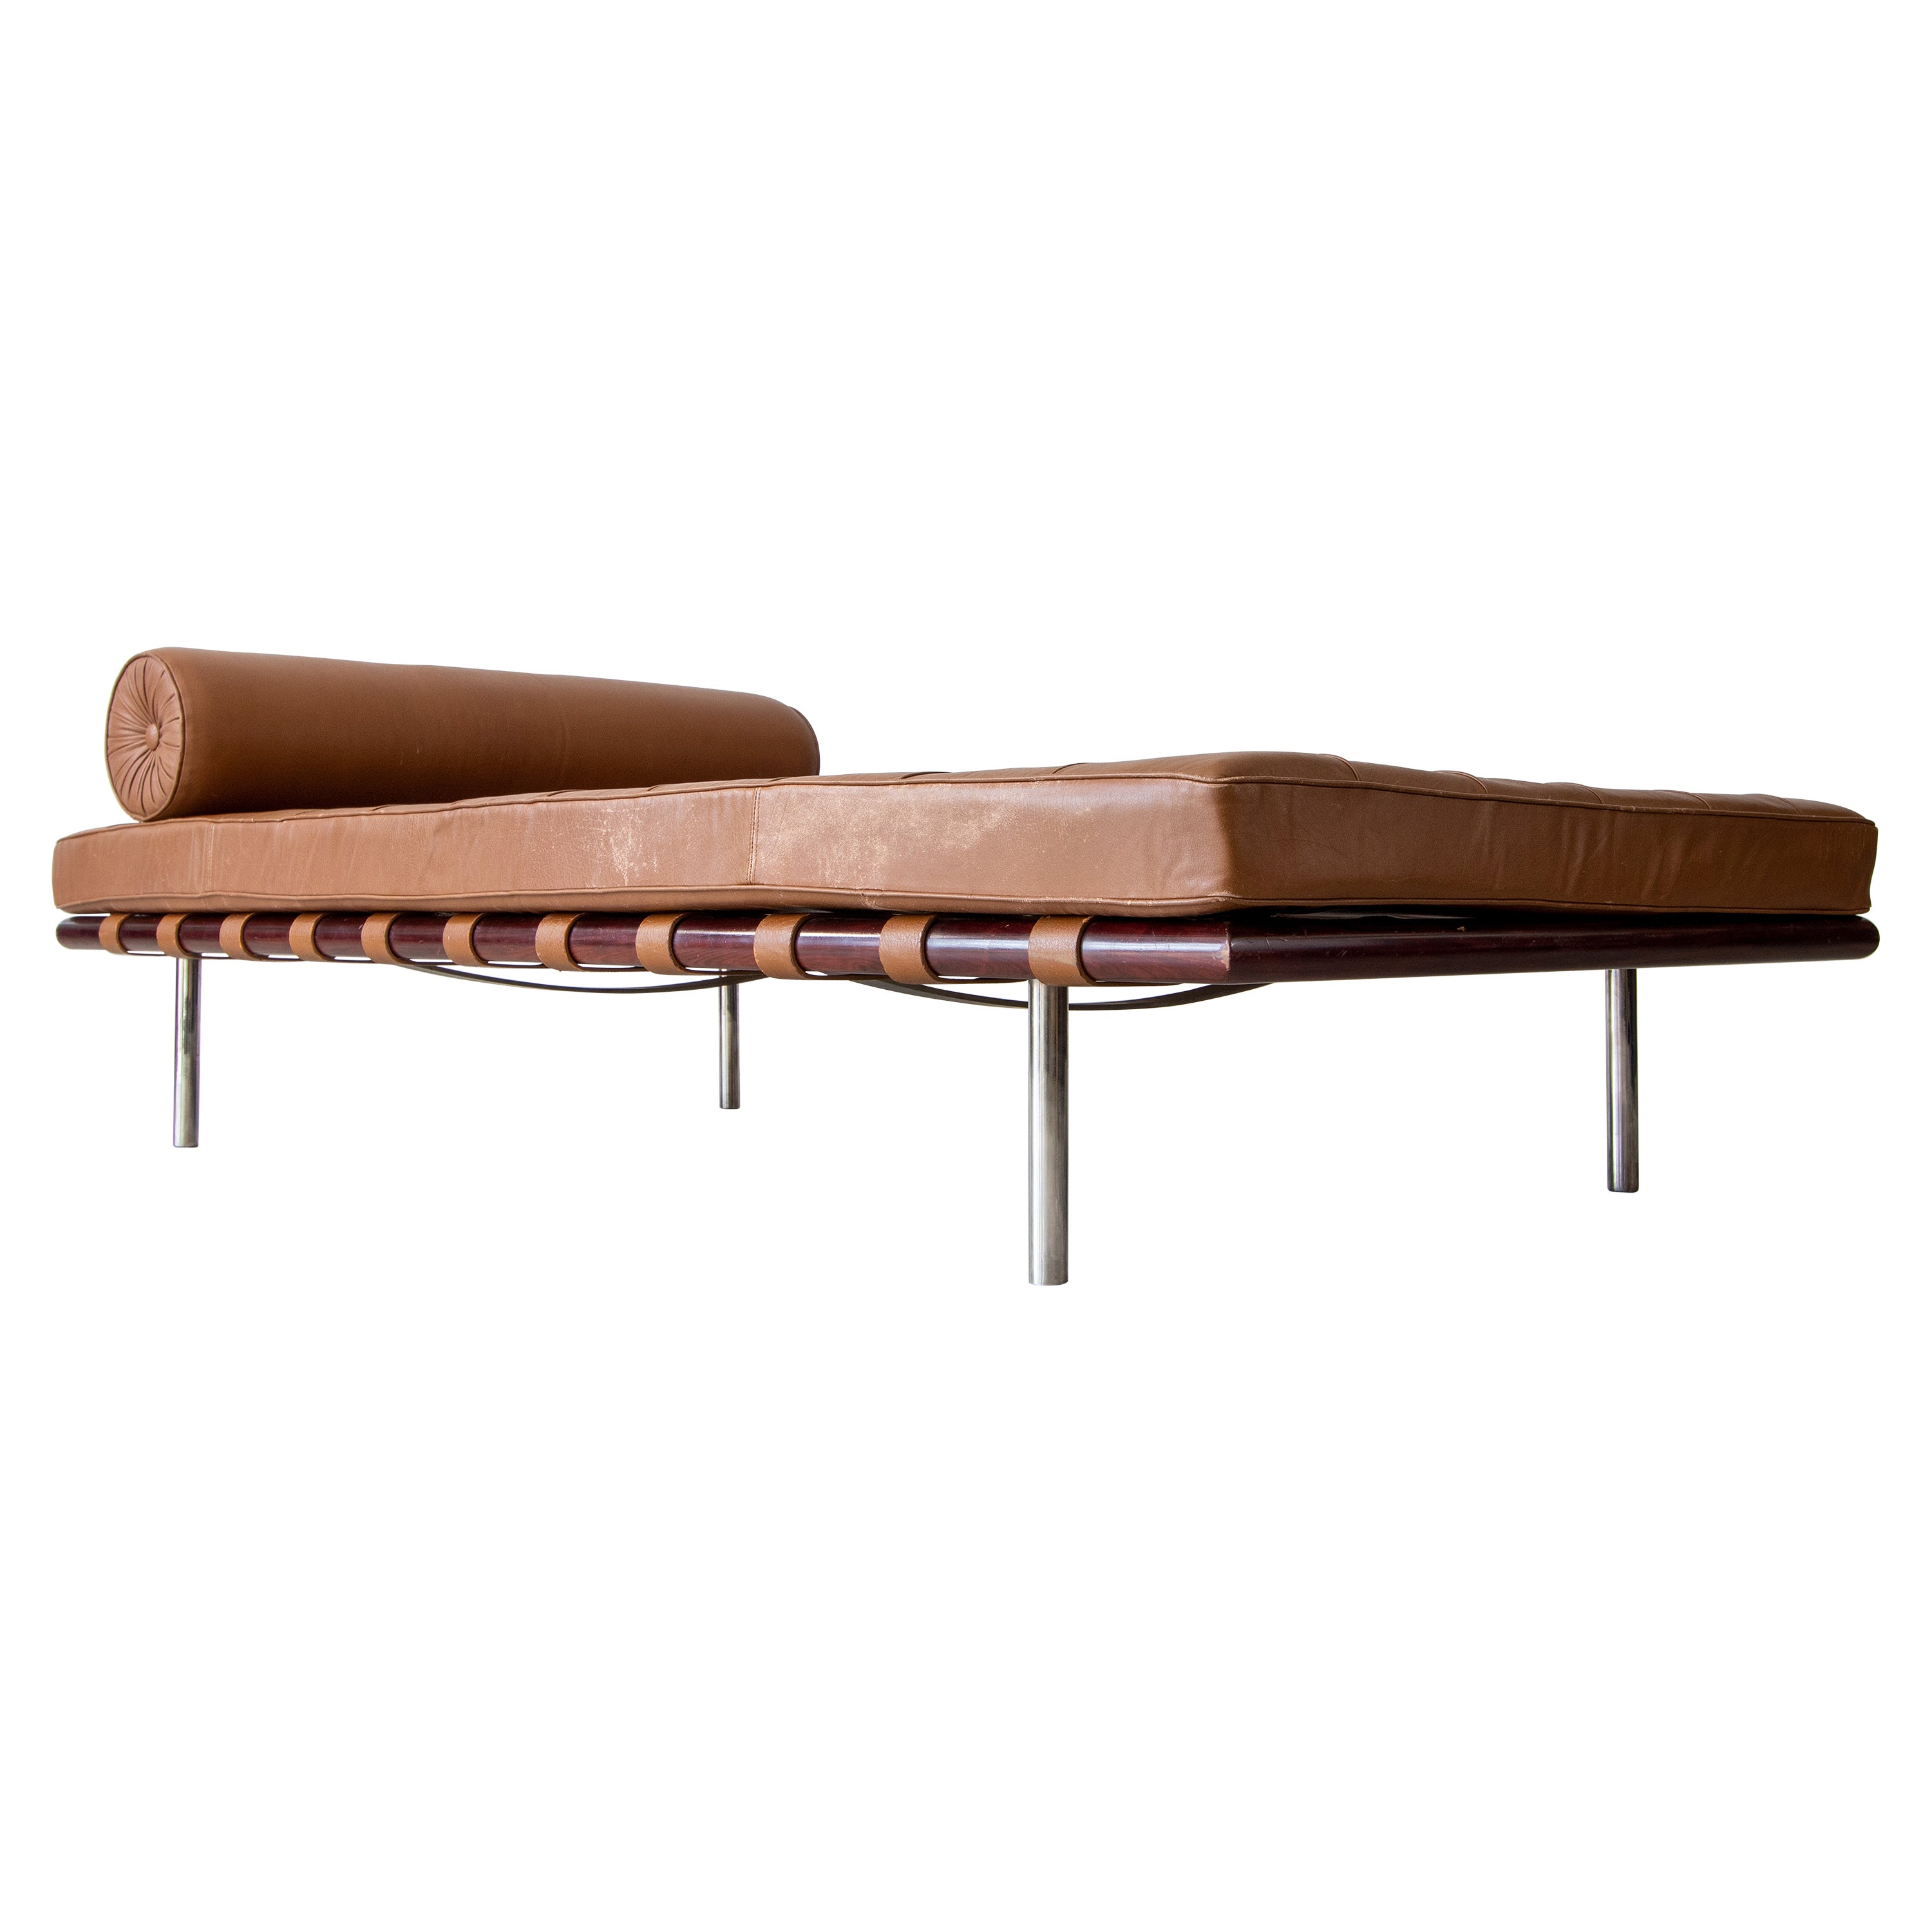 1970s Mies Van Der Rohe Barcelona Daybed Couch for Knoll Rosewood / Tan Leather